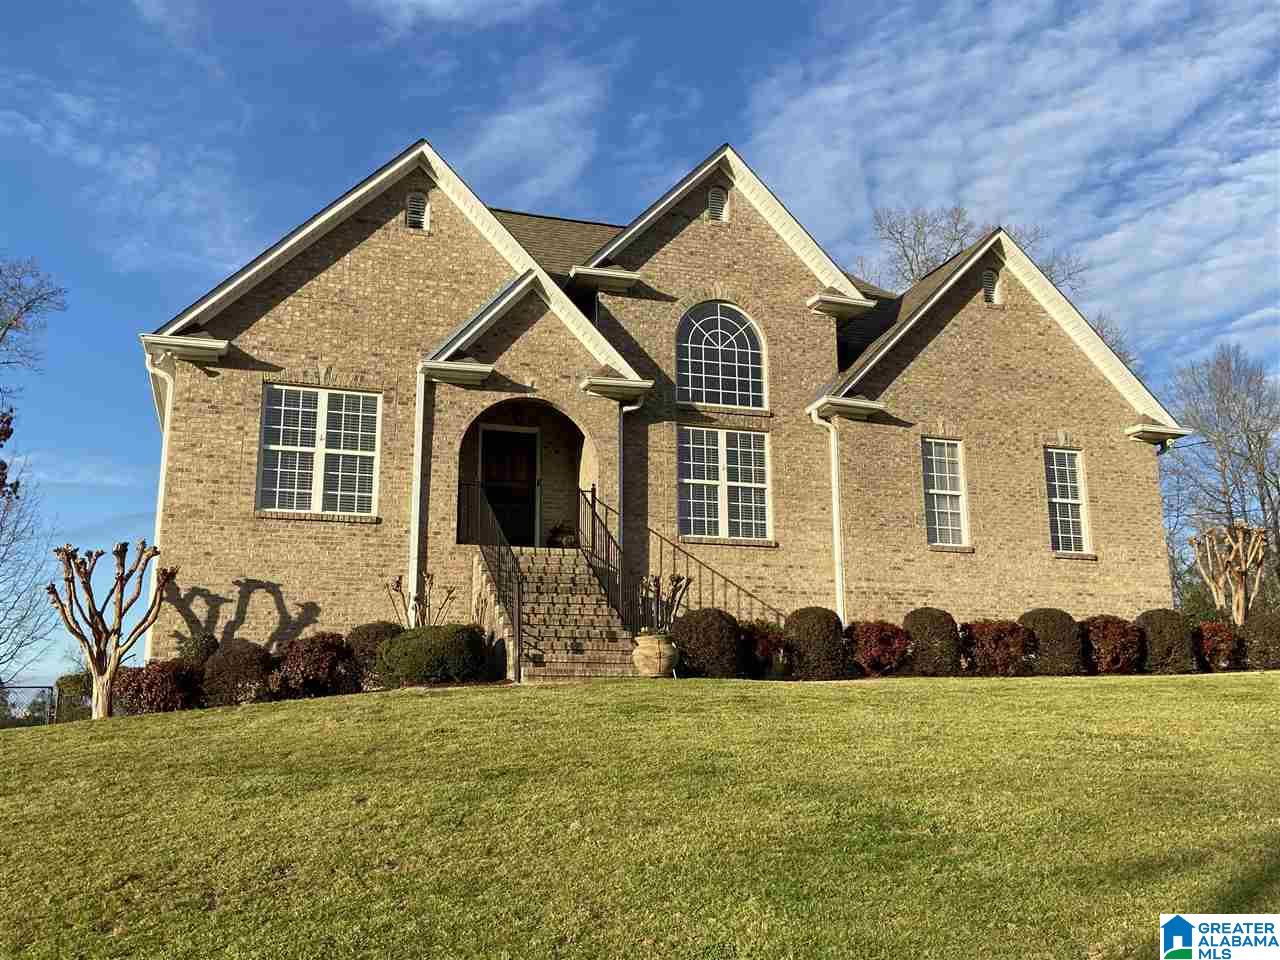 873667 1 Open Houses for Feb. 7-9 from McCalla to Odenville and in between